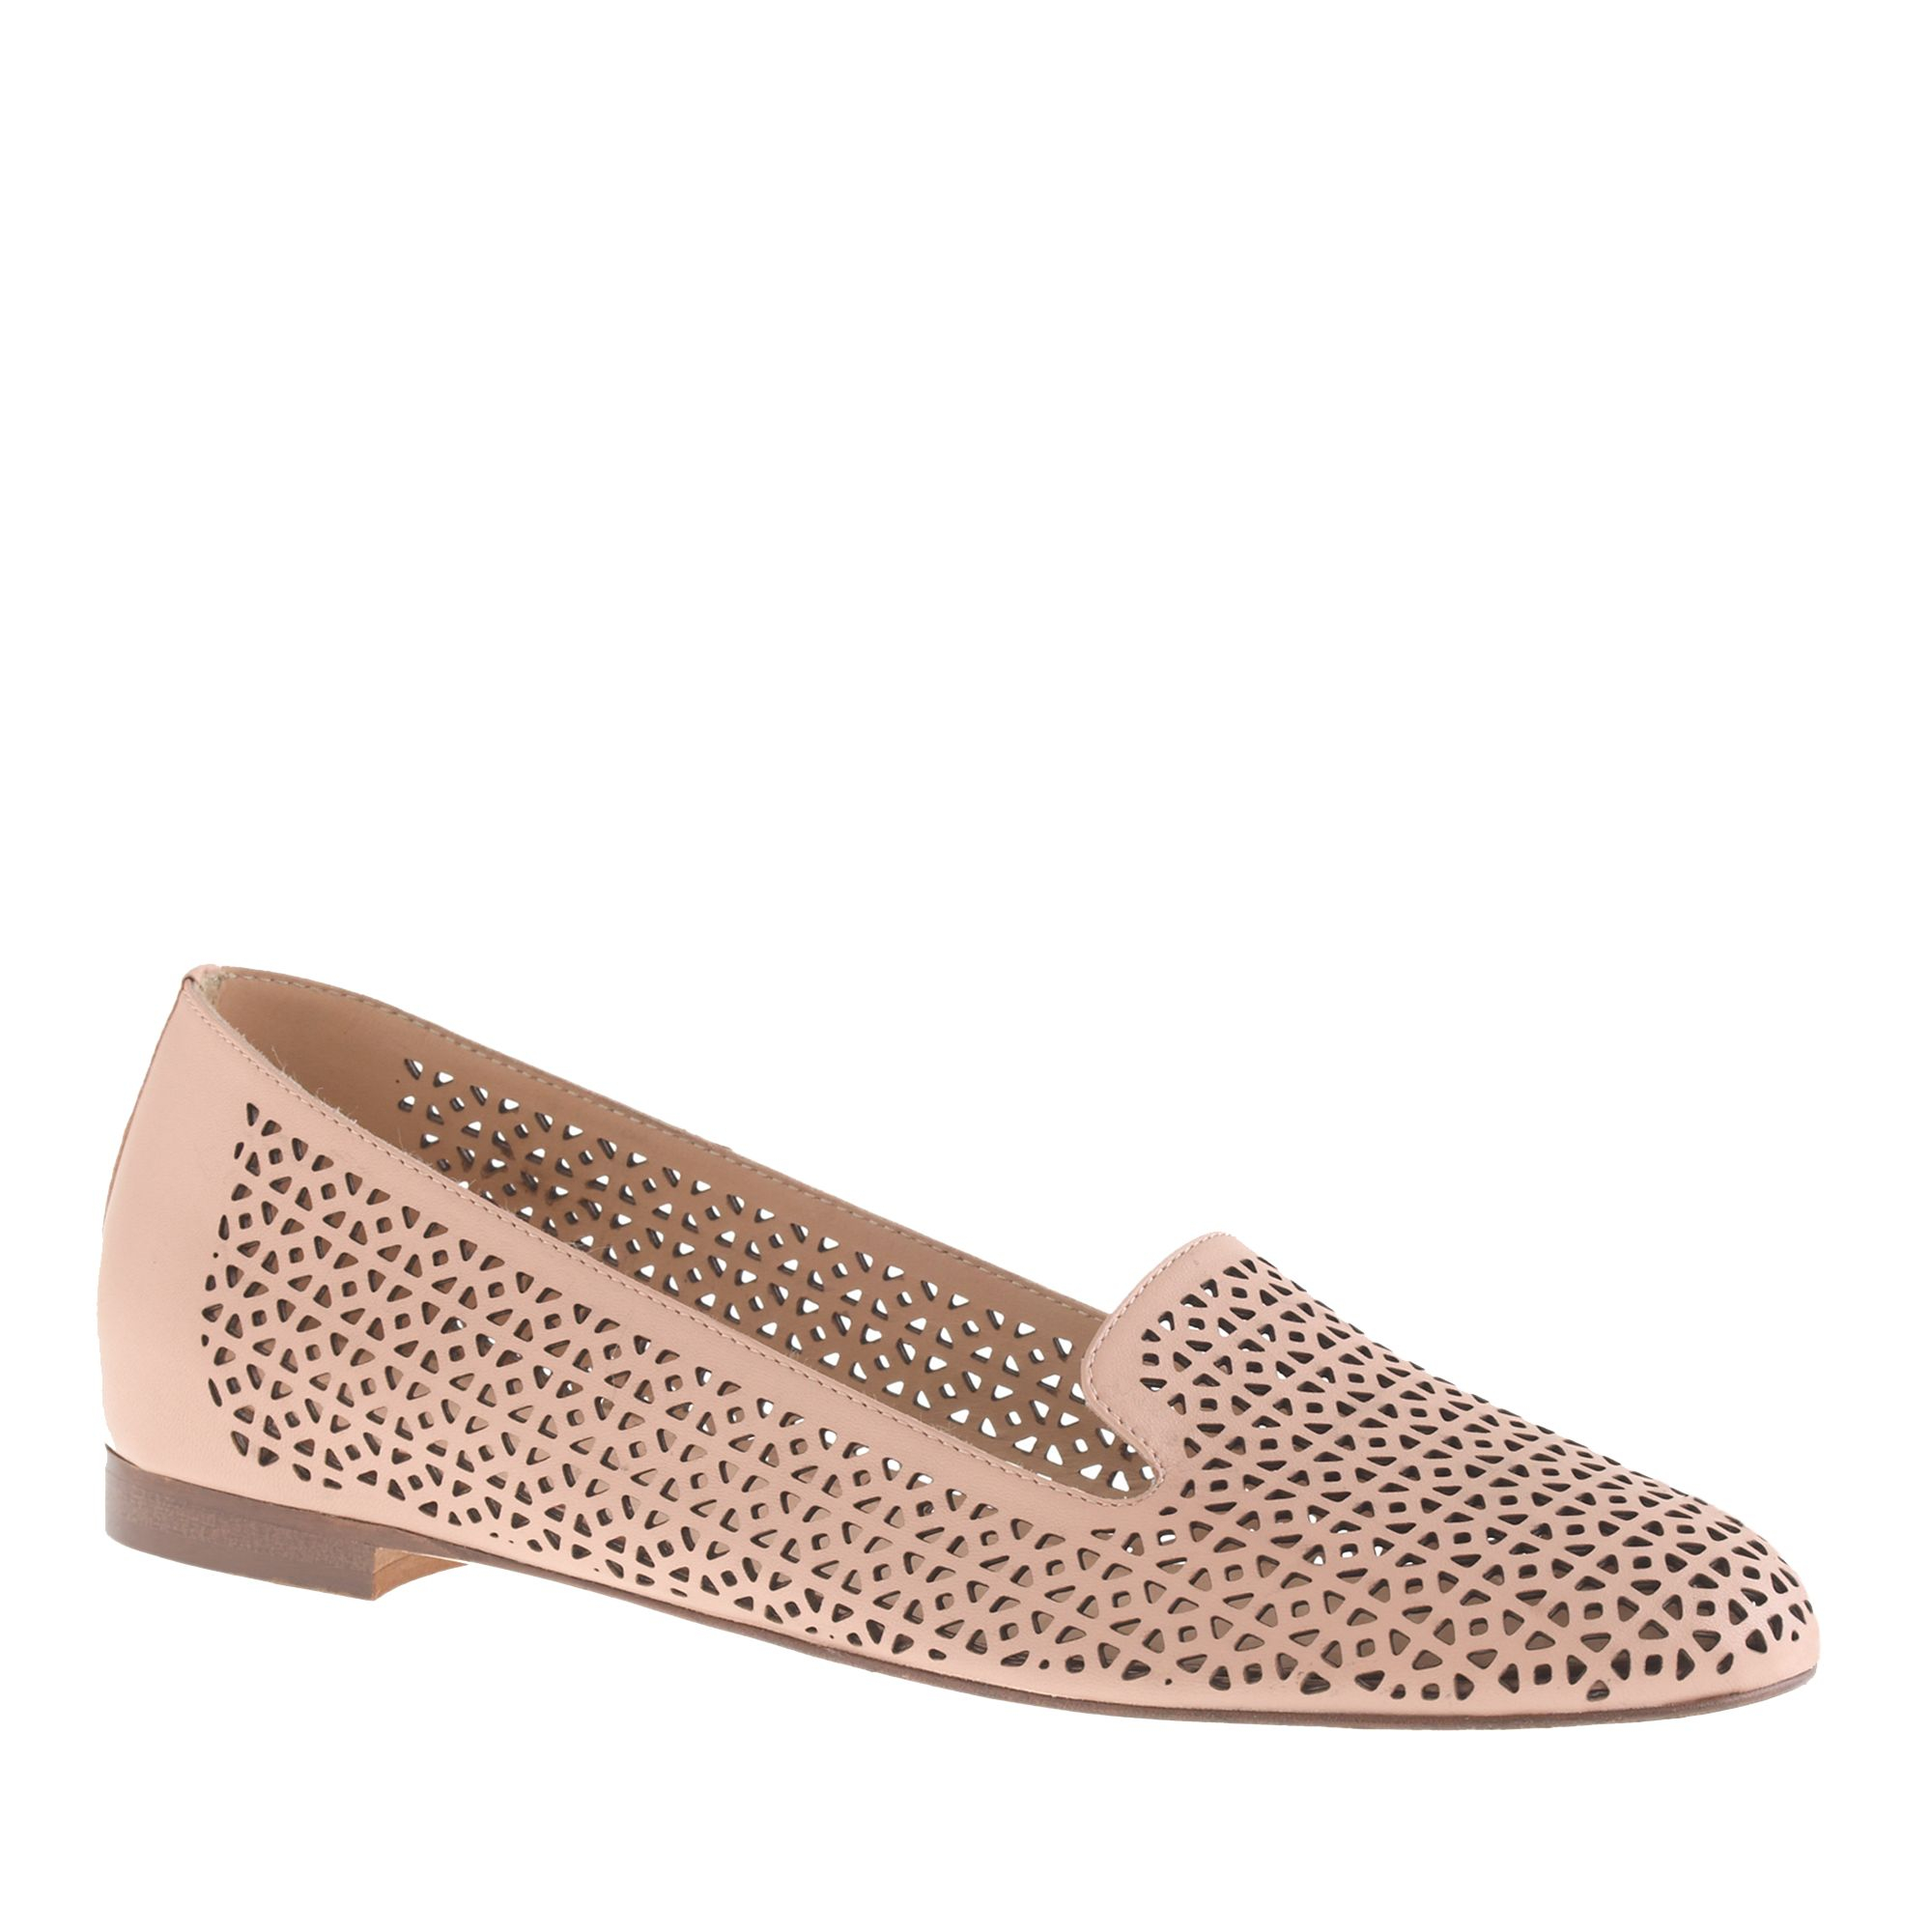 J.crew Cleo Perforated Loafers in Natural | Lyst